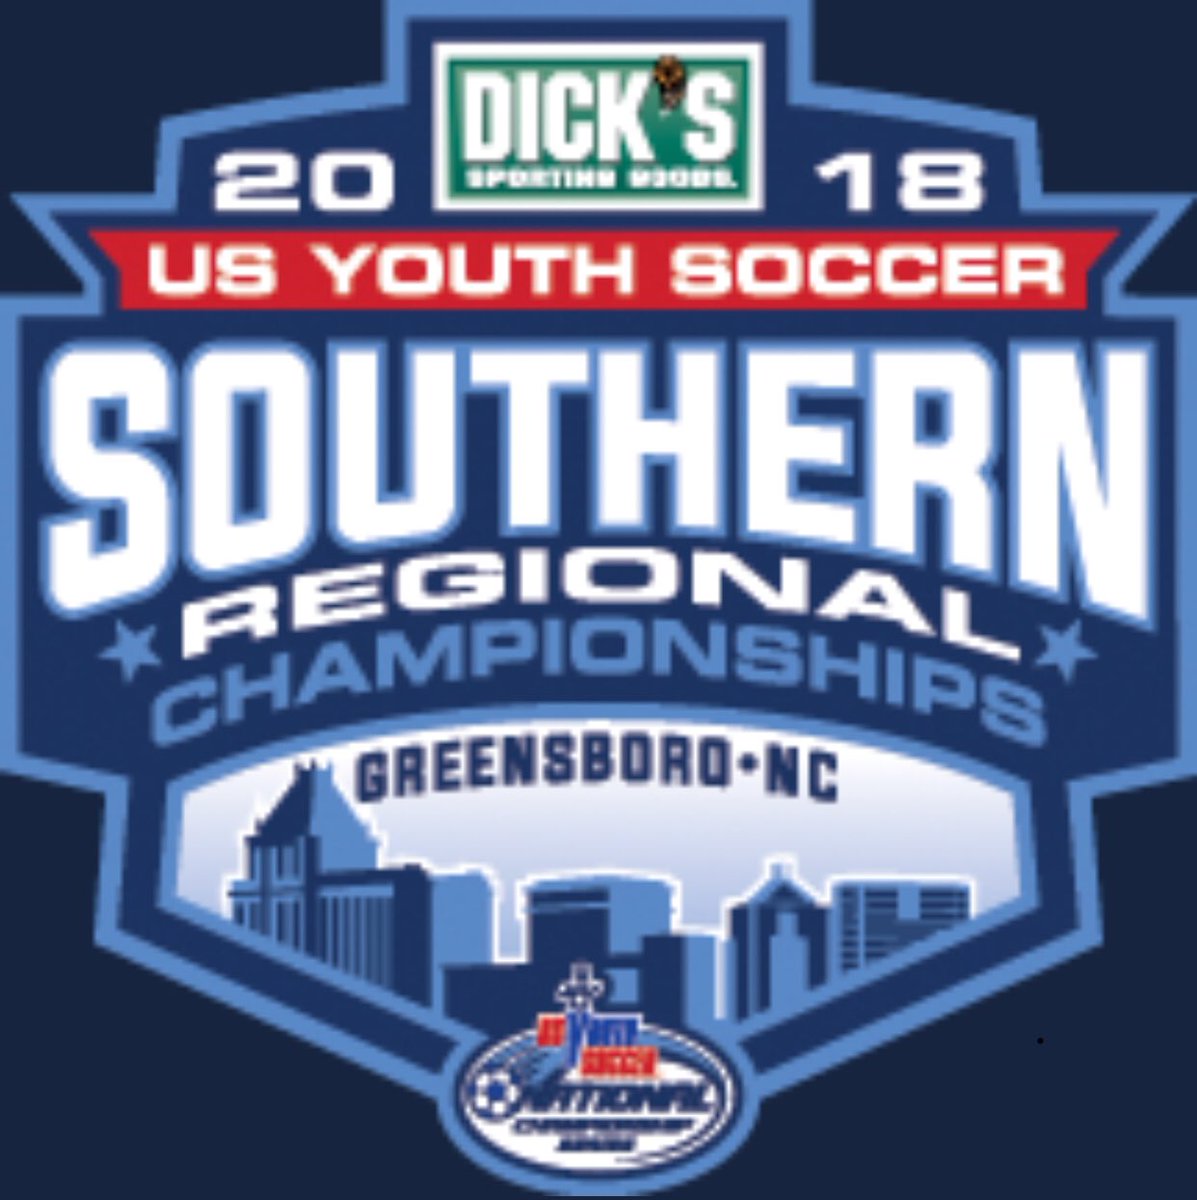 Southern Regionals are soon!  June 22-28 in Greensboro,NC. #southernregionals #clubsoccer #soccer #usaMountPleasant #01Premier #2020 #14